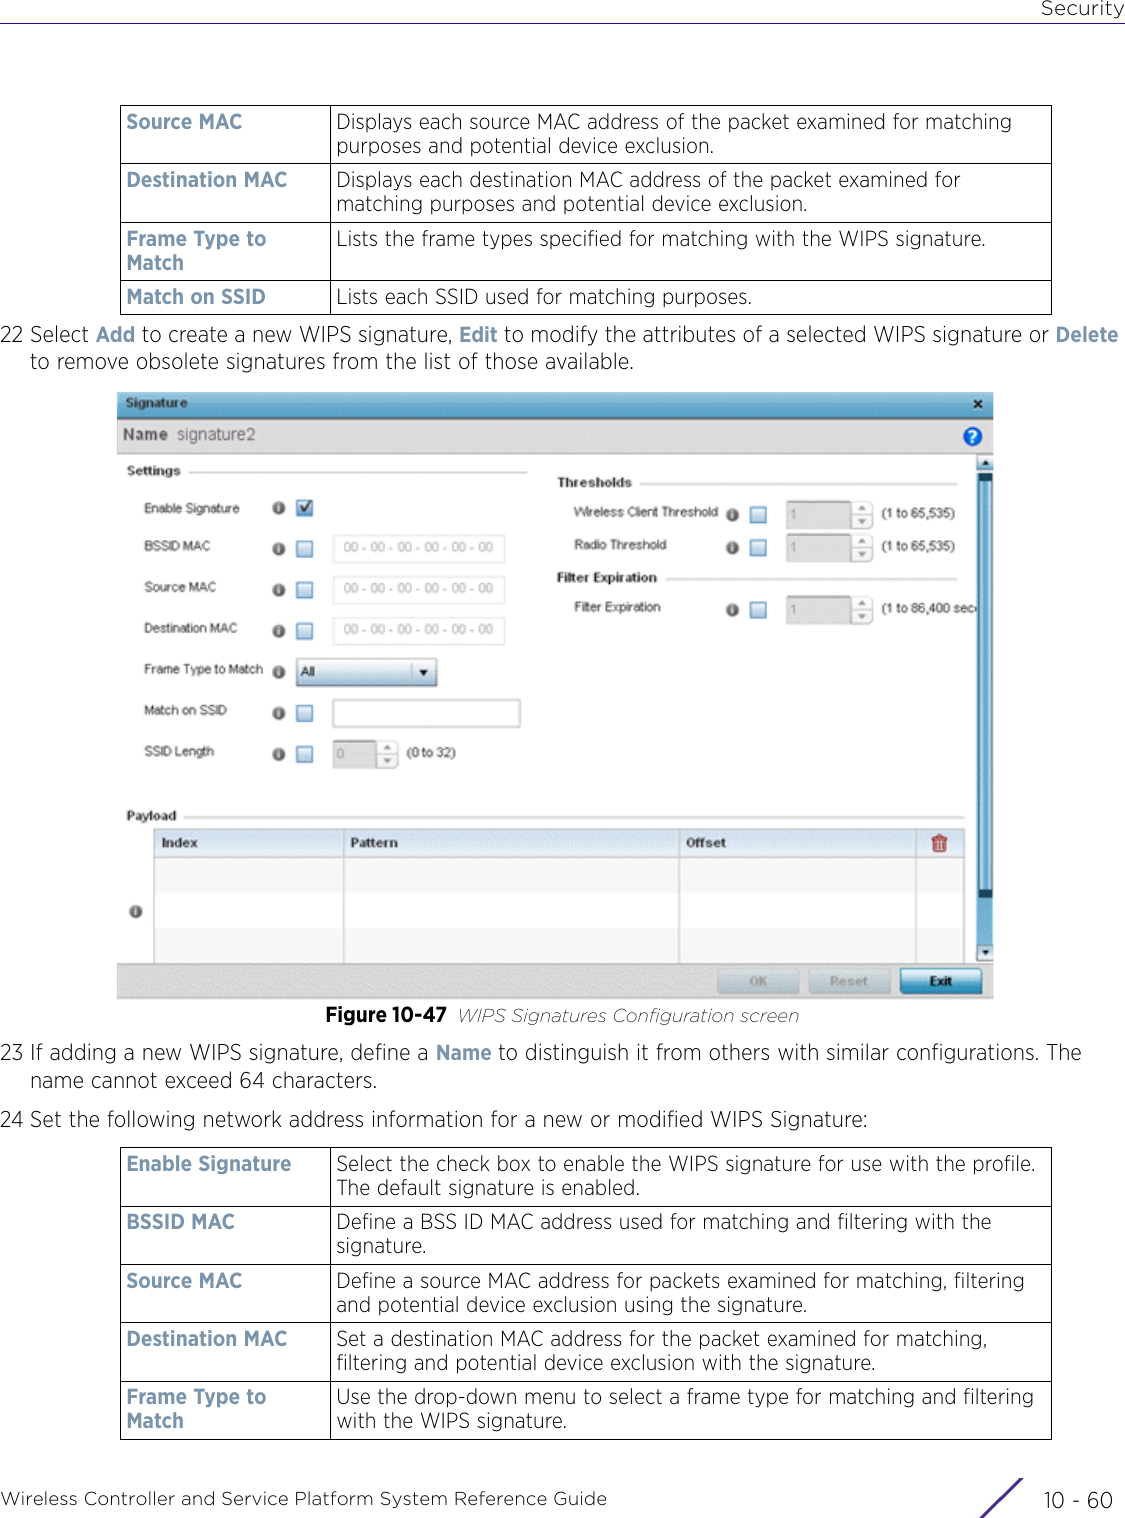 SecurityWireless Controller and Service Platform System Reference Guide  10 - 6022 Select Add to create a new WIPS signature, Edit to modify the attributes of a selected WIPS signature or Delete to remove obsolete signatures from the list of those available.Figure 10-47 WIPS Signatures Configuration screen23 If adding a new WIPS signature, define a Name to distinguish it from others with similar configurations. The name cannot exceed 64 characters.24 Set the following network address information for a new or modified WIPS Signature:Source MAC Displays each source MAC address of the packet examined for matching purposes and potential device exclusion.Destination MAC Displays each destination MAC address of the packet examined for matching purposes and potential device exclusion.Frame Type to MatchLists the frame types specified for matching with the WIPS signature. Match on SSID Lists each SSID used for matching purposes.Enable Signature Select the check box to enable the WIPS signature for use with the profile. The default signature is enabled.BSSID MAC Define a BSS ID MAC address used for matching and filtering with the signature.Source MAC Define a source MAC address for packets examined for matching, filtering and potential device exclusion using the signature.Destination MAC Set a destination MAC address for the packet examined for matching, filtering and potential device exclusion with the signature.Frame Type to MatchUse the drop-down menu to select a frame type for matching and filtering with the WIPS signature.